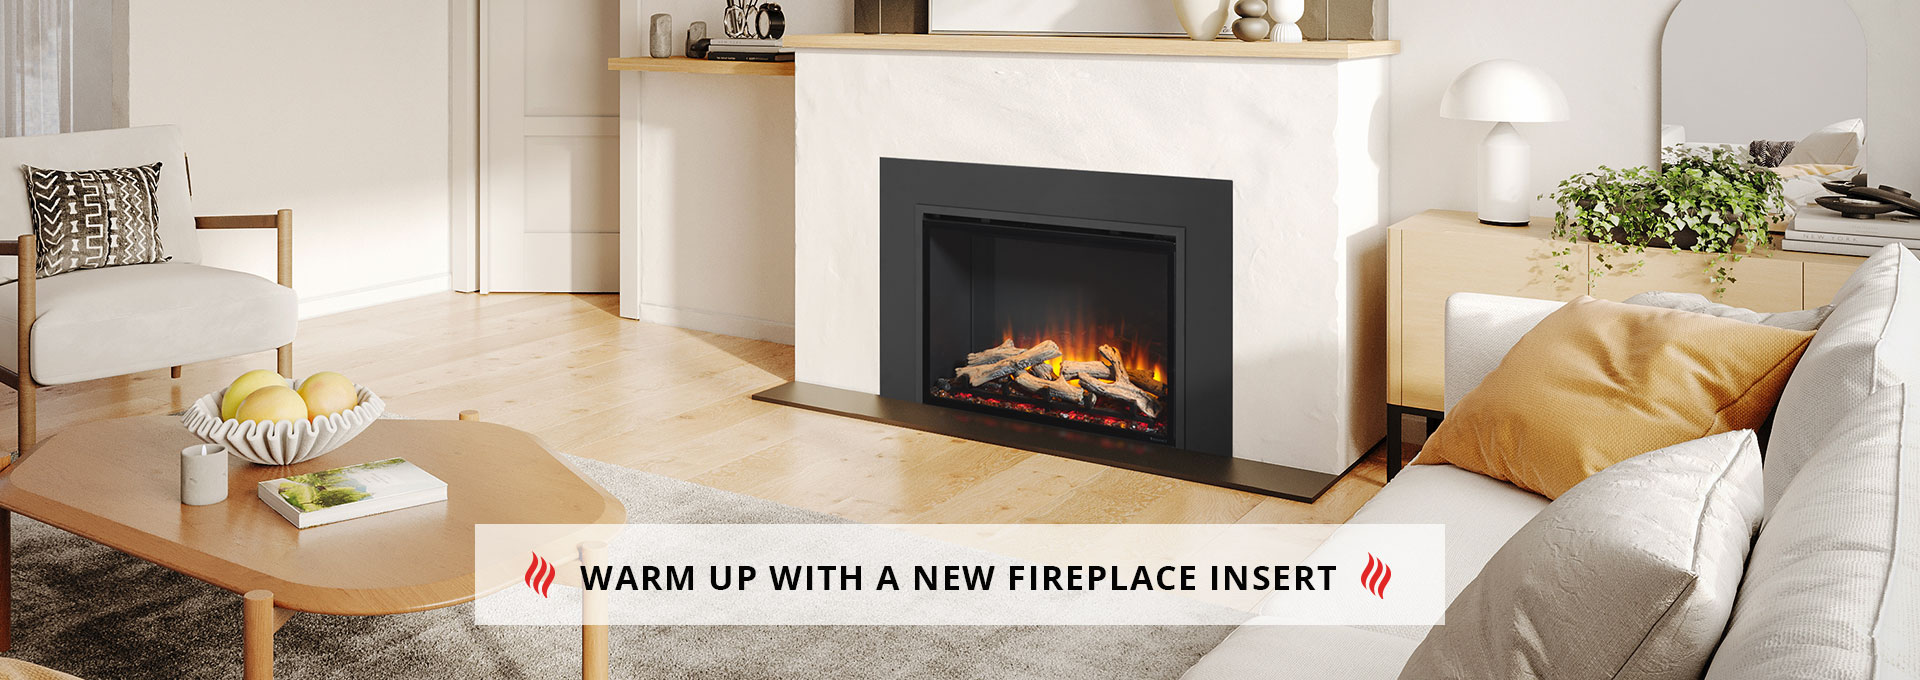 Warm Up With A New Fireplace Insert 